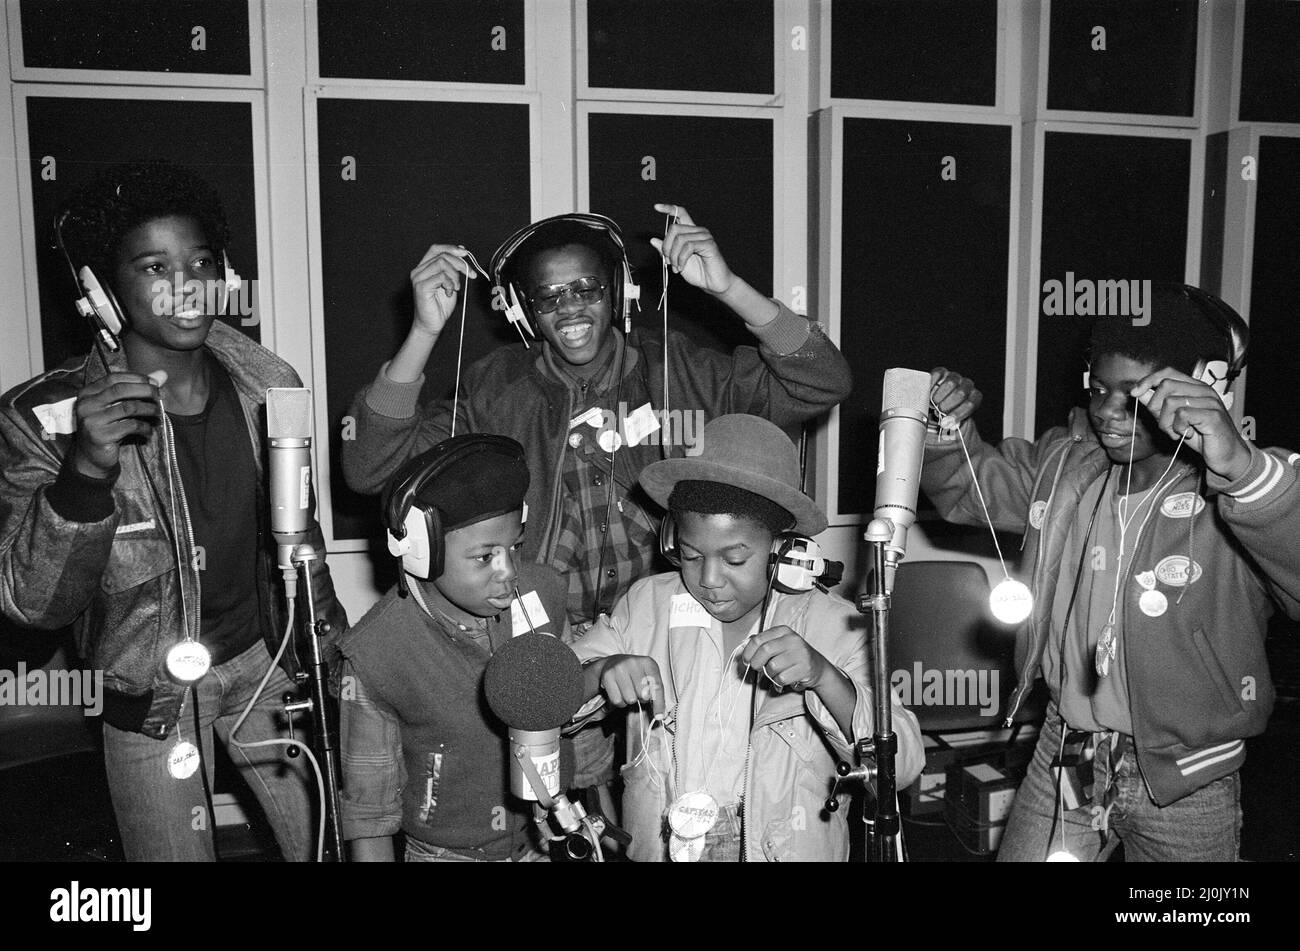 Musical Youth, British Jamaican pop / reggae group, at Capital Radio studios in London where they are helping to launch a road safety campaign involving glitter discs 8th October 1982. Members of the group are: Freddie Waite a.k.a. Junior, Dennis Seaton, Patrick Waite, Michael Grant & Kelvin Grant Stock Photo